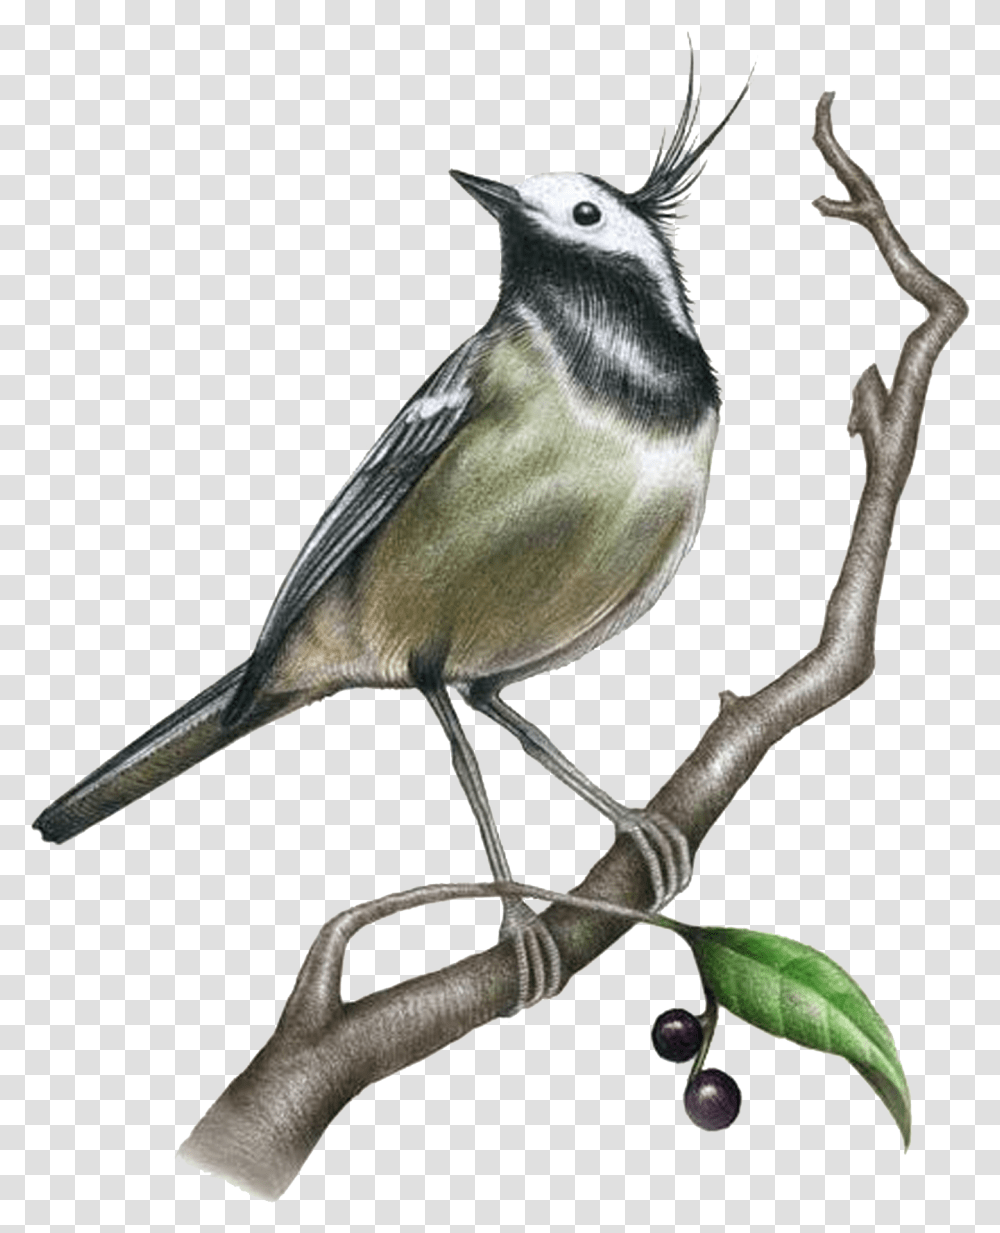 Drawing Painting Bird Illustration Realistic Sketch Drawings Of Birds, Animal, Jay, Finch, Blue Jay Transparent Png